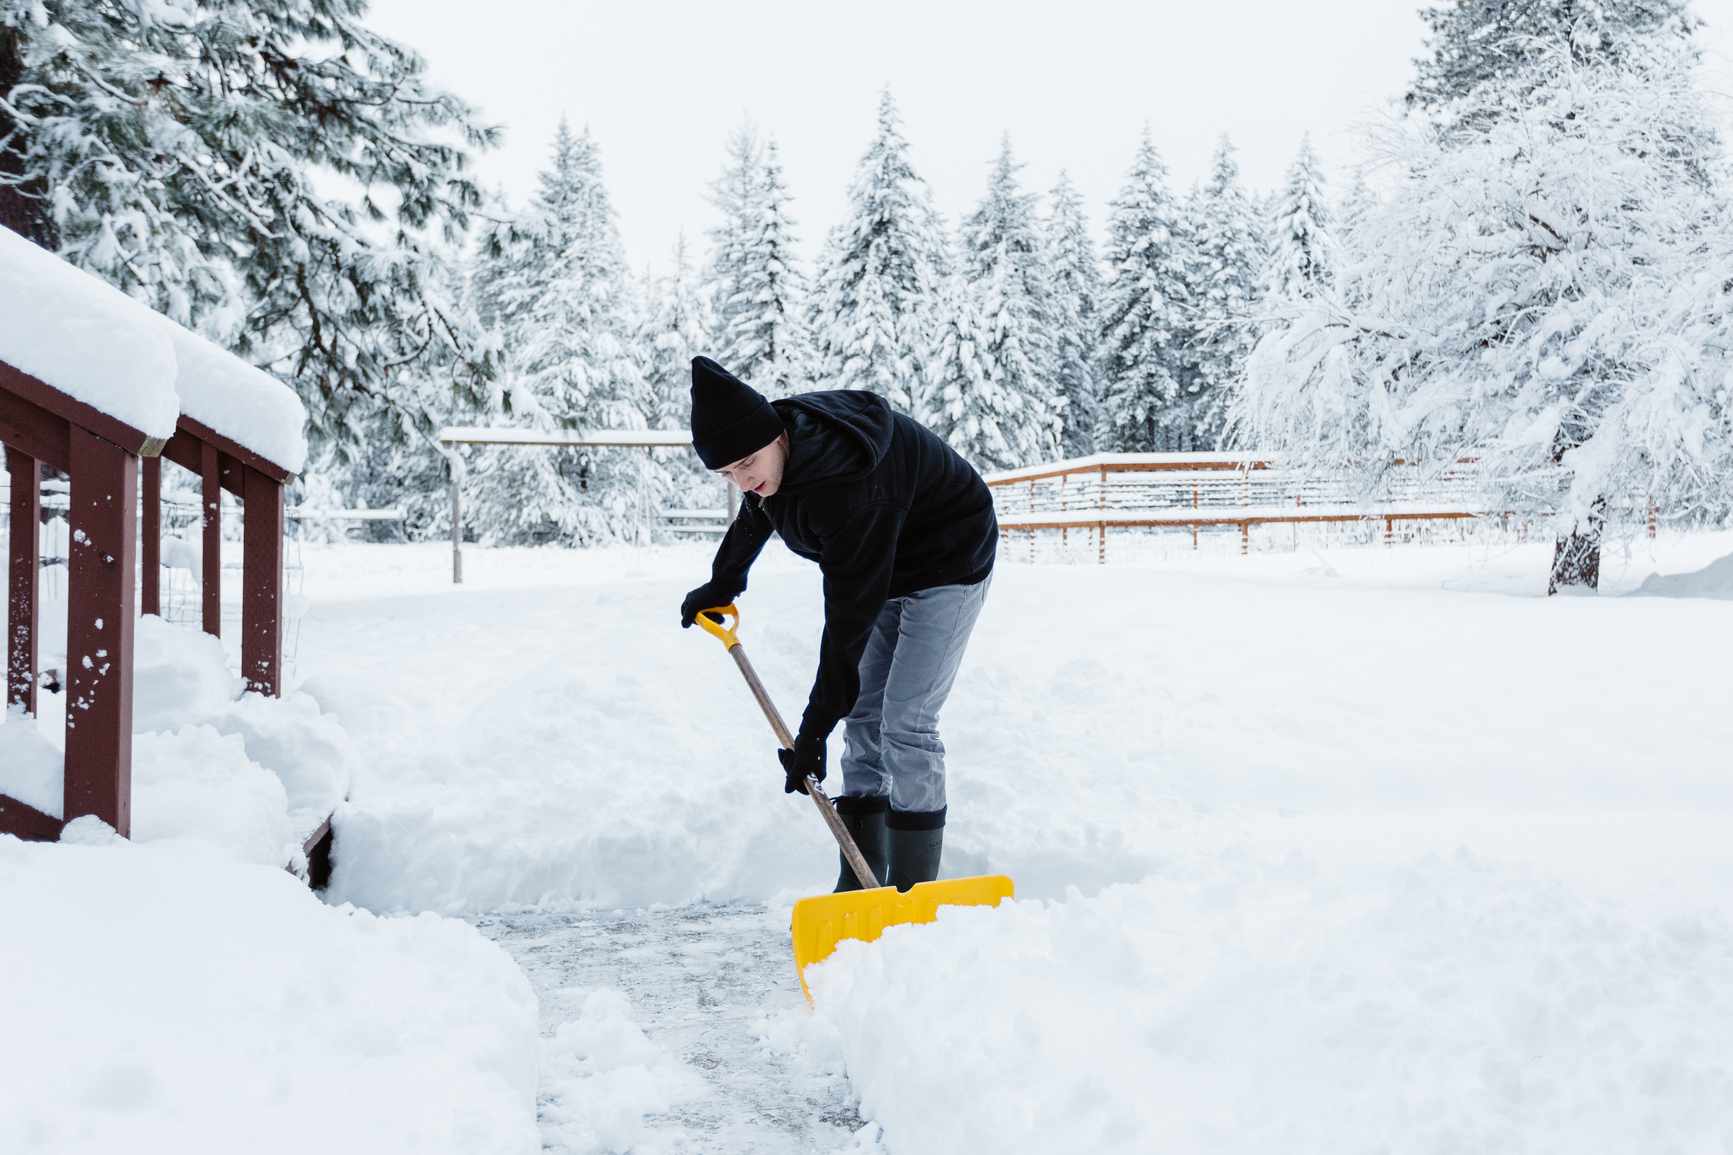  The 5 Most Common Wintertime Injuries, and How to Avoid Them 